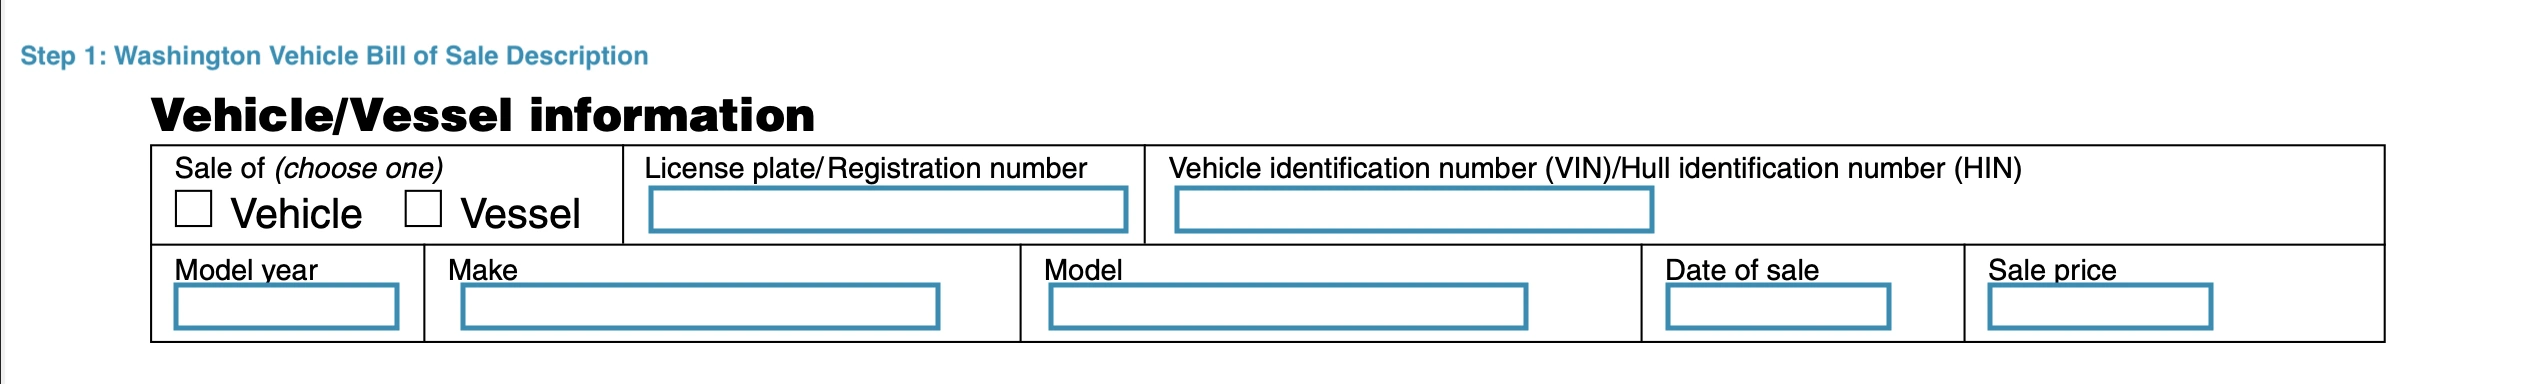 Section for filling out vehicle's particulars of vehicle bill of sale form for Washington